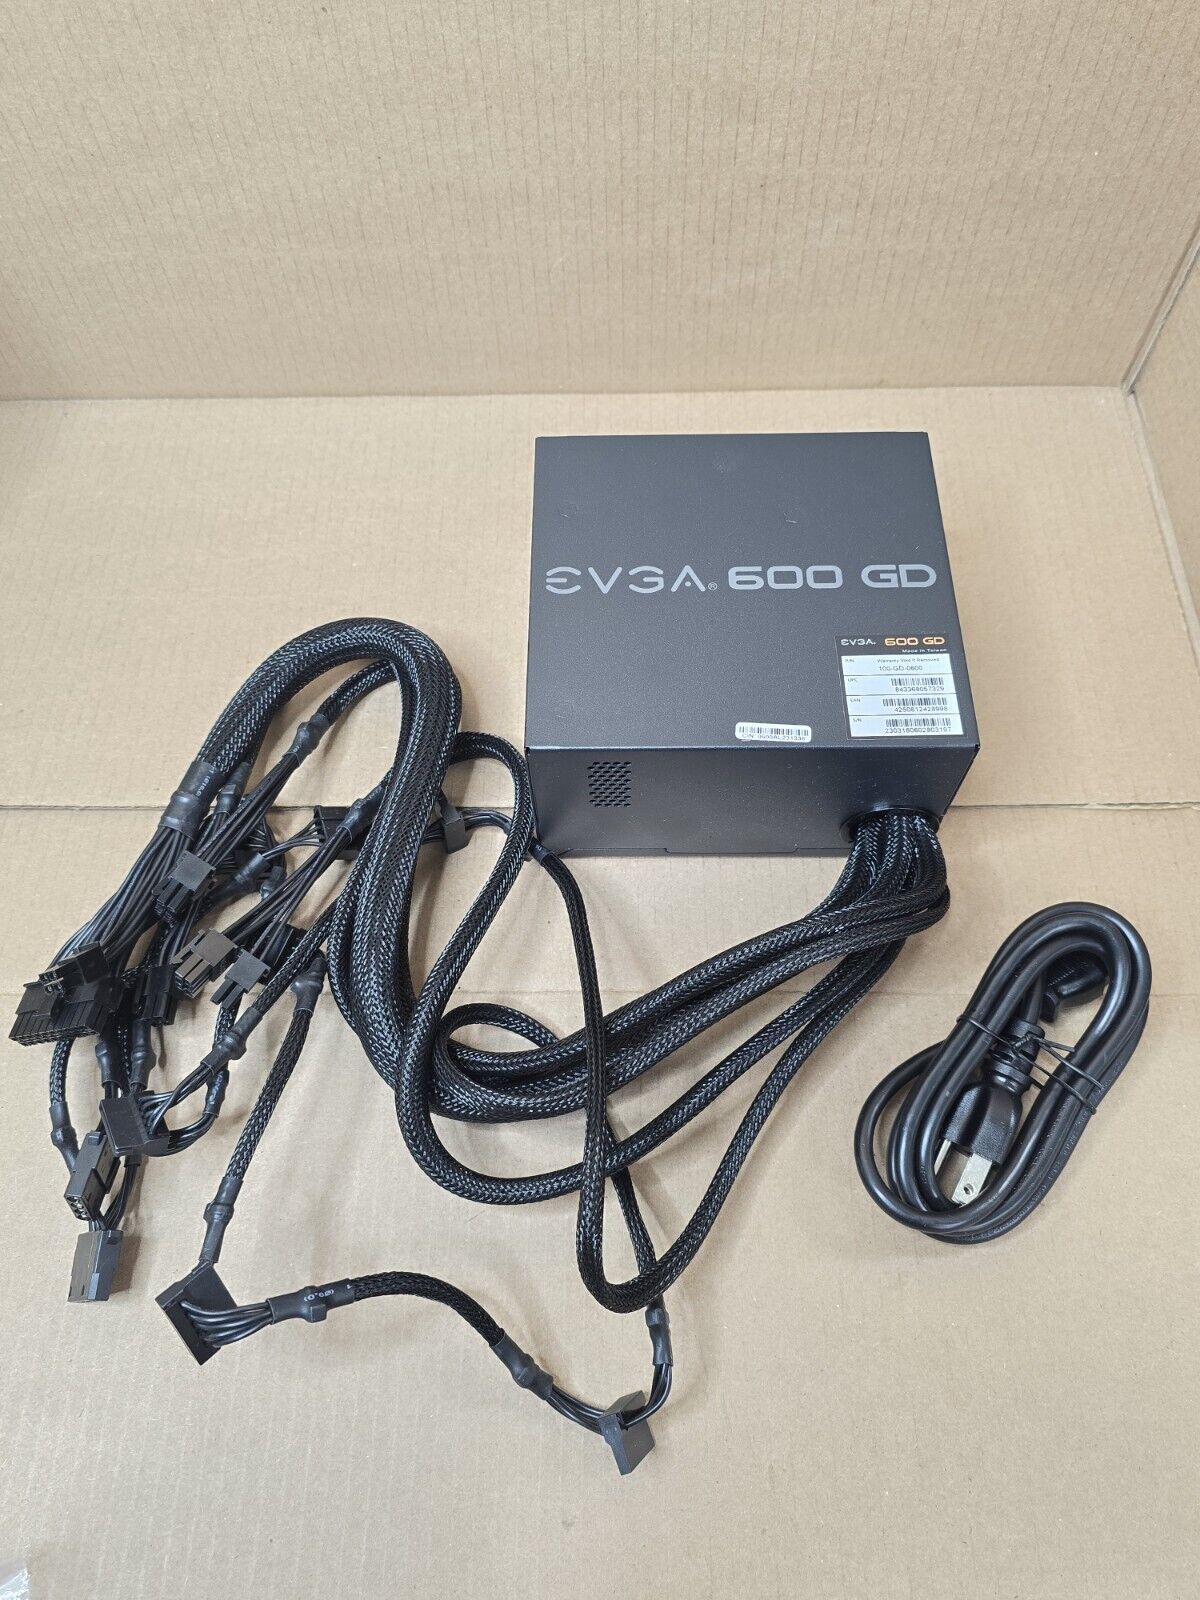 EVGA 600 GD 600W Gold Switching Power Supply 100-GD-0600-BC